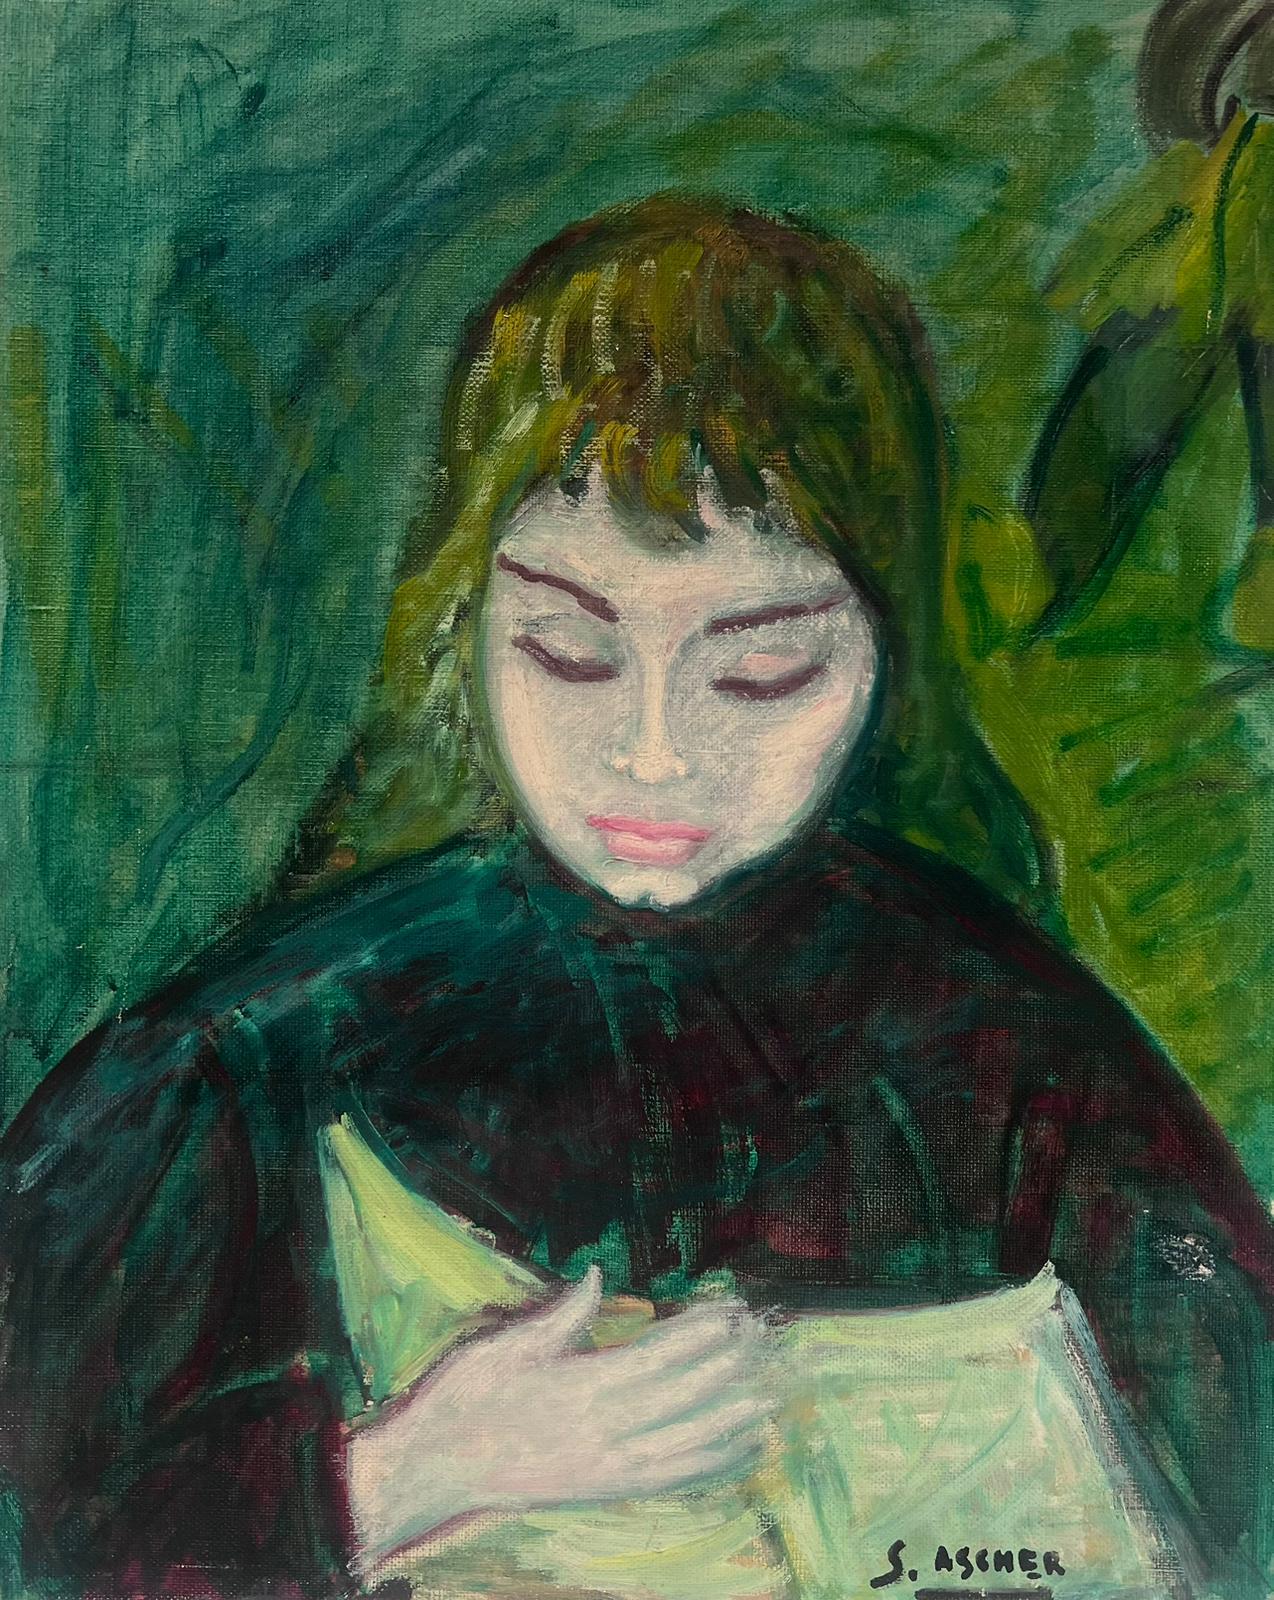 Portrait of a Young Lady
French School, mid 20th century
signed, S. Ascher
signed oil on canvas, unframed
canvas: 16 x 13 inches
provenance: private collection, Paris
condition: good and sound condition 